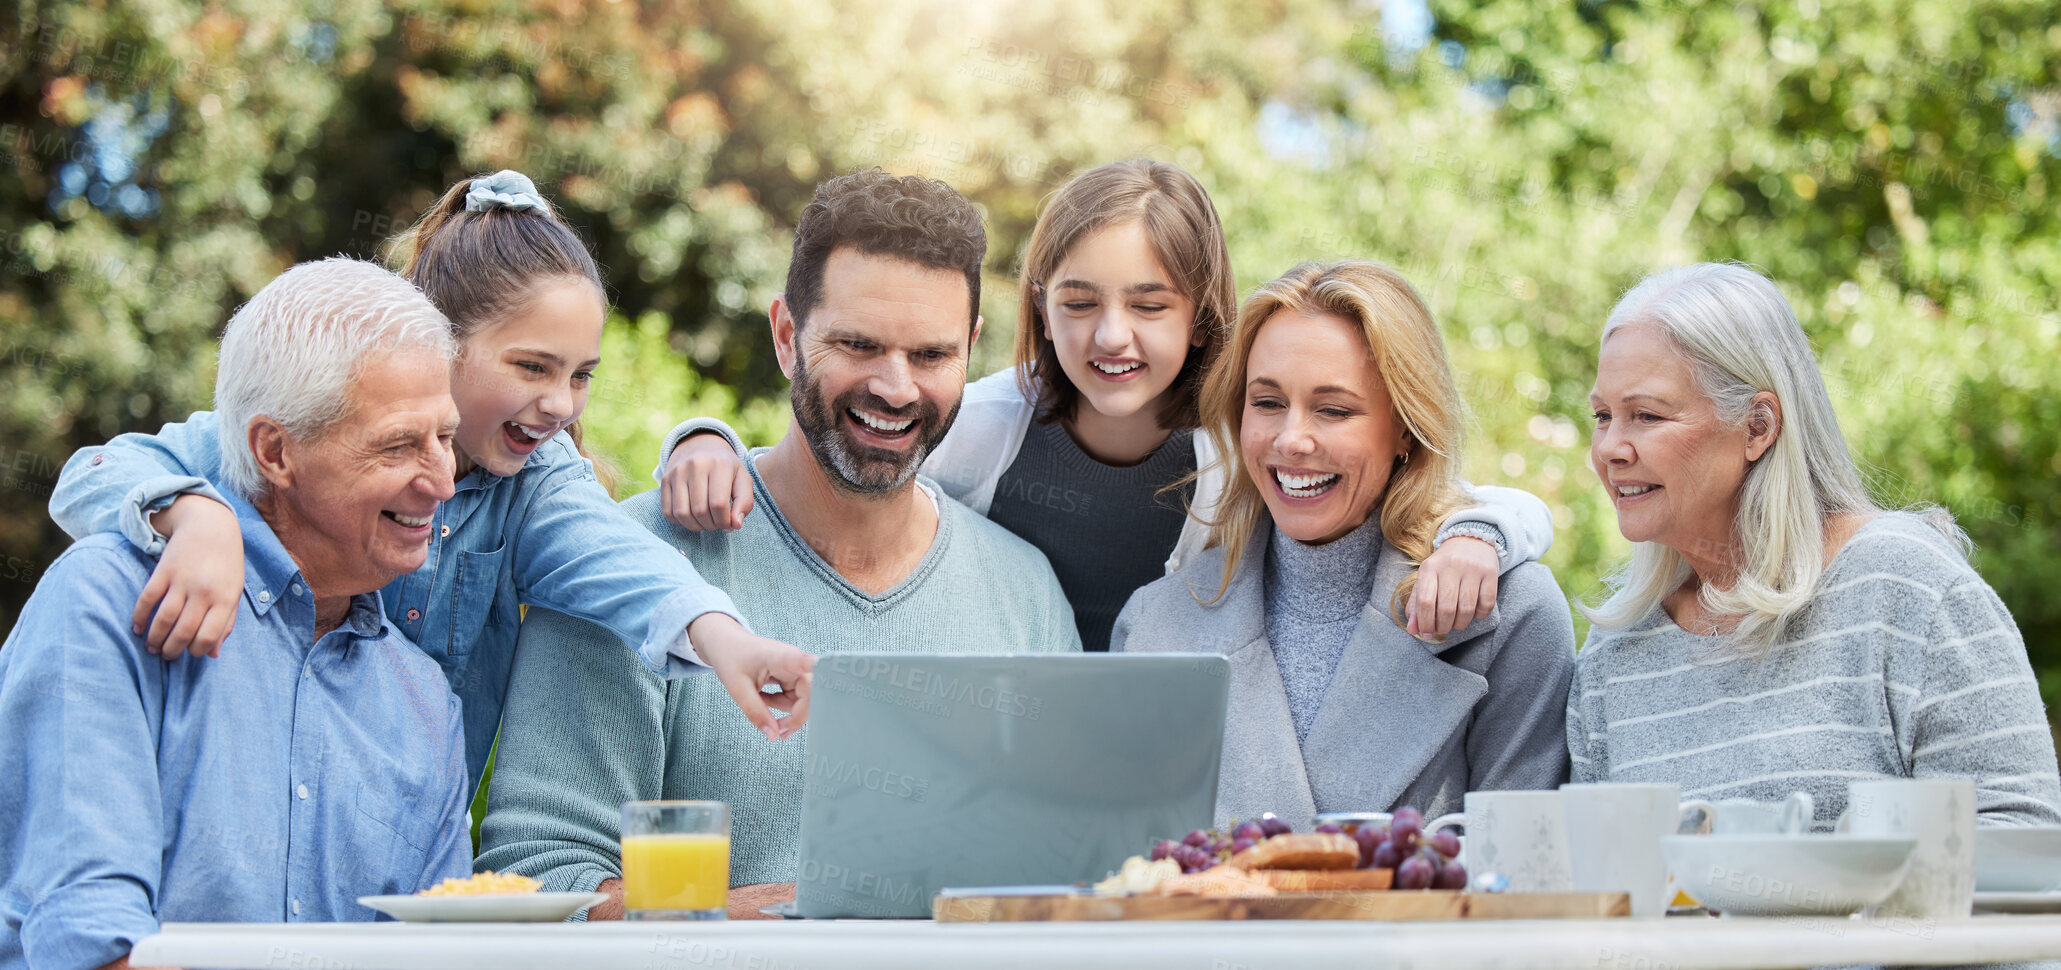 Buy stock photo Shot of a family using a laptop outside